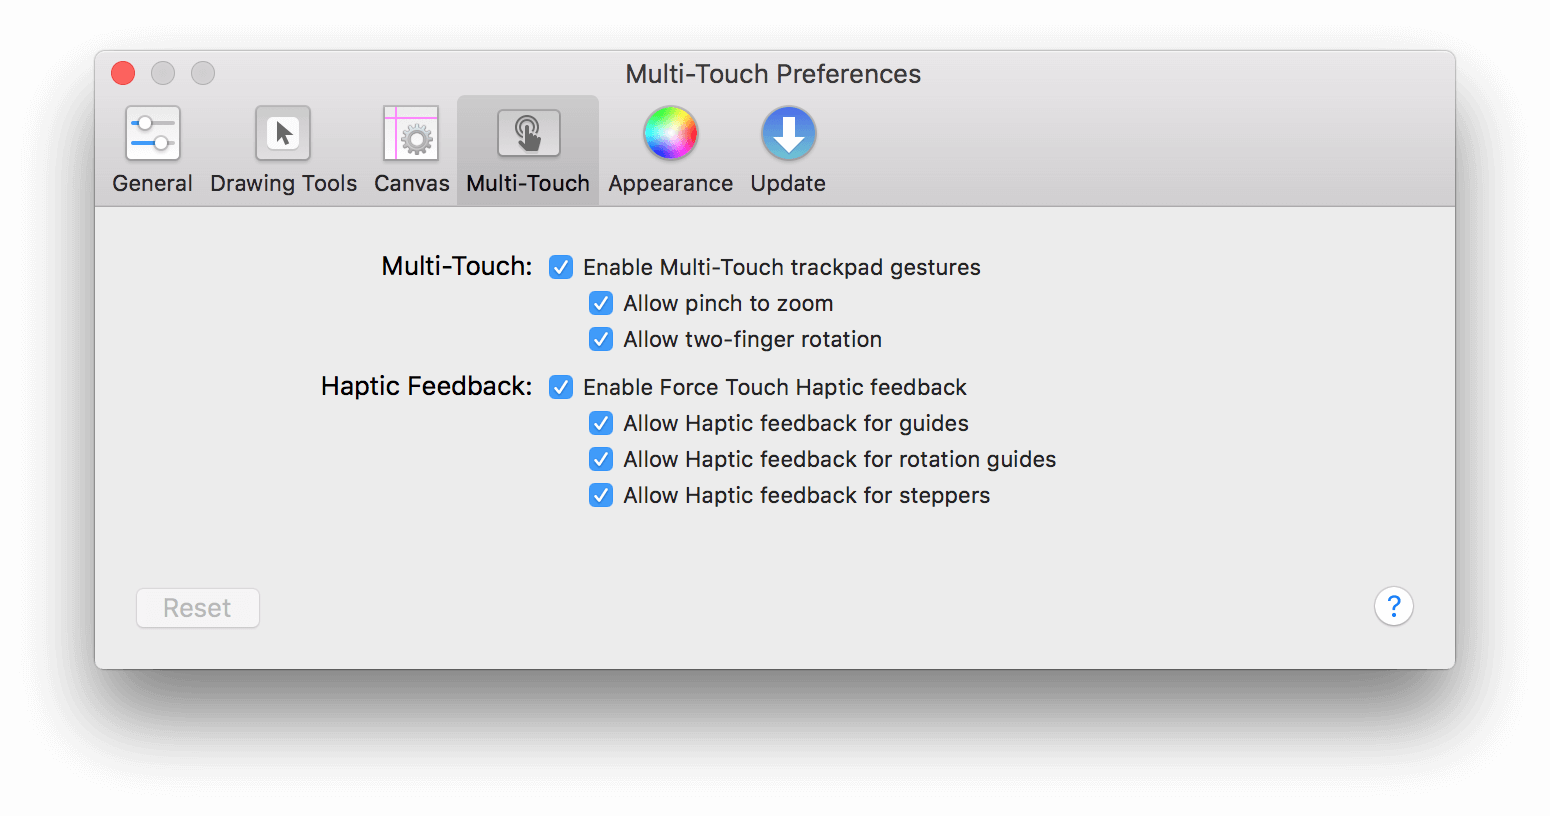 The Multi-Touch Preferences panel